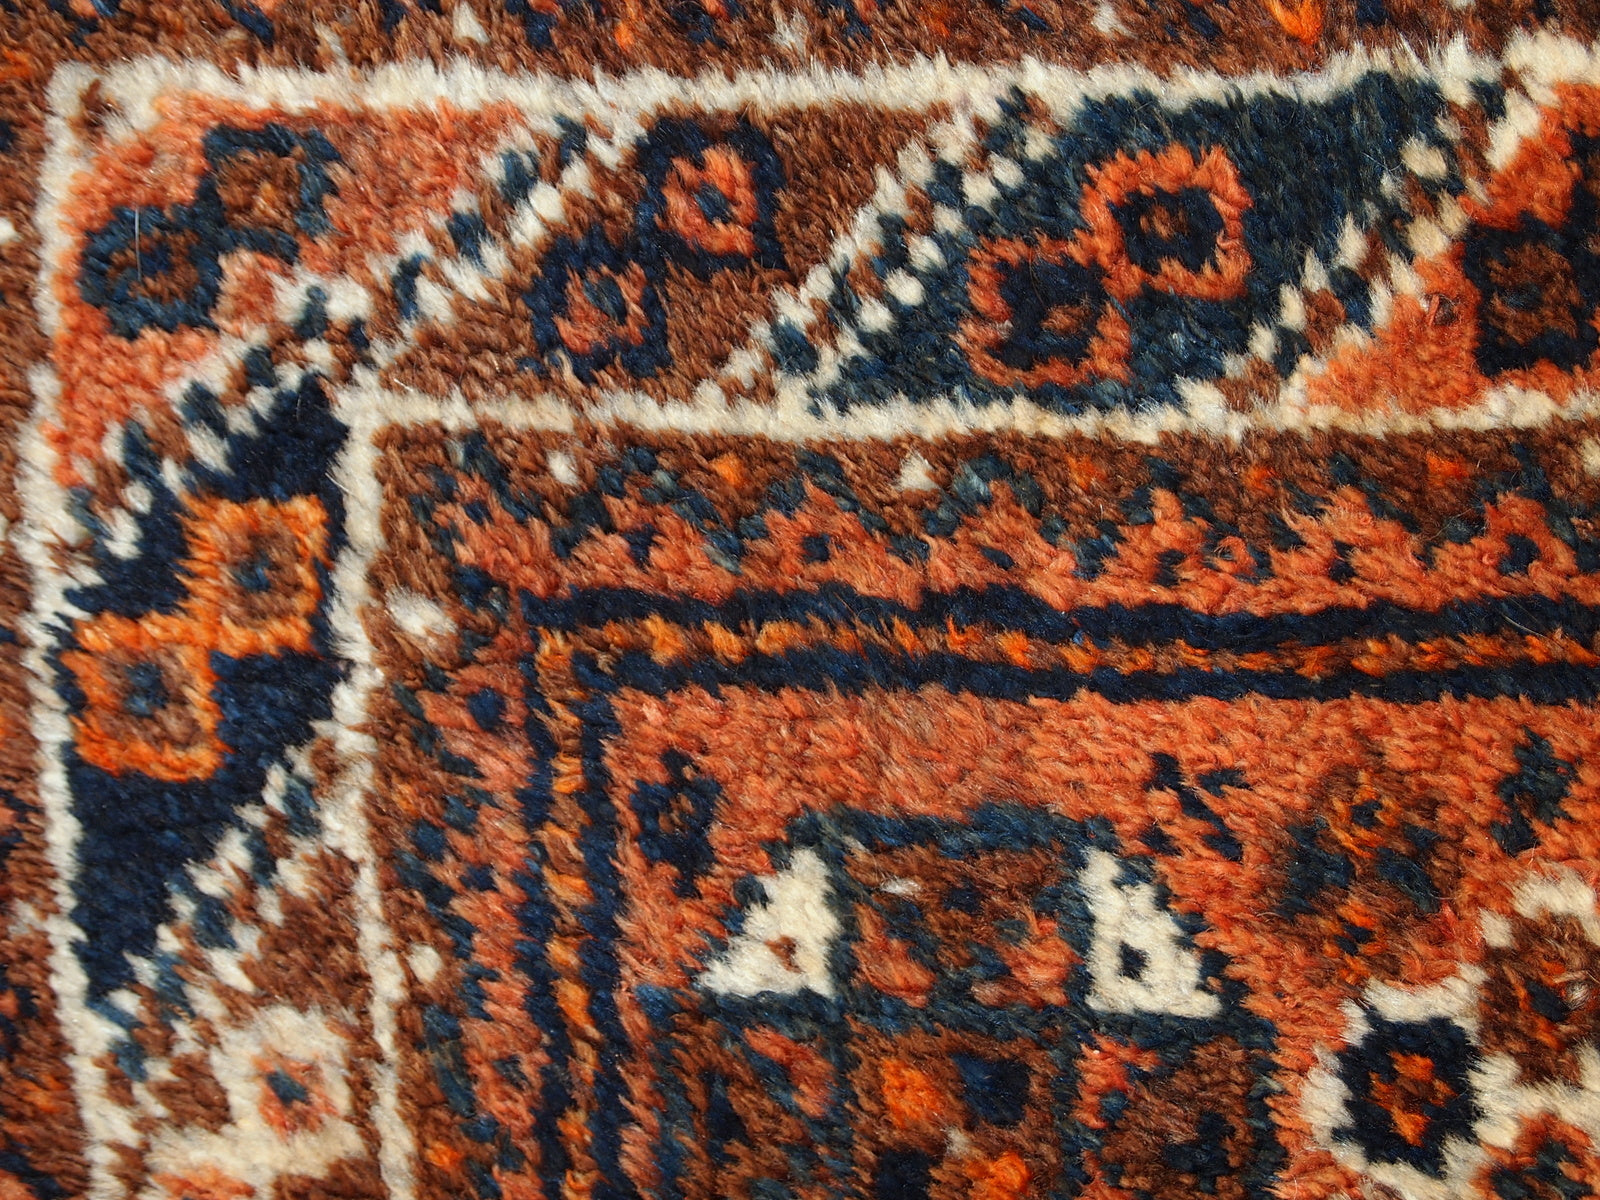 Antique collectible Persian Shiraz rug in original good condition. The rug is in rust shade with navy blue and white details. 